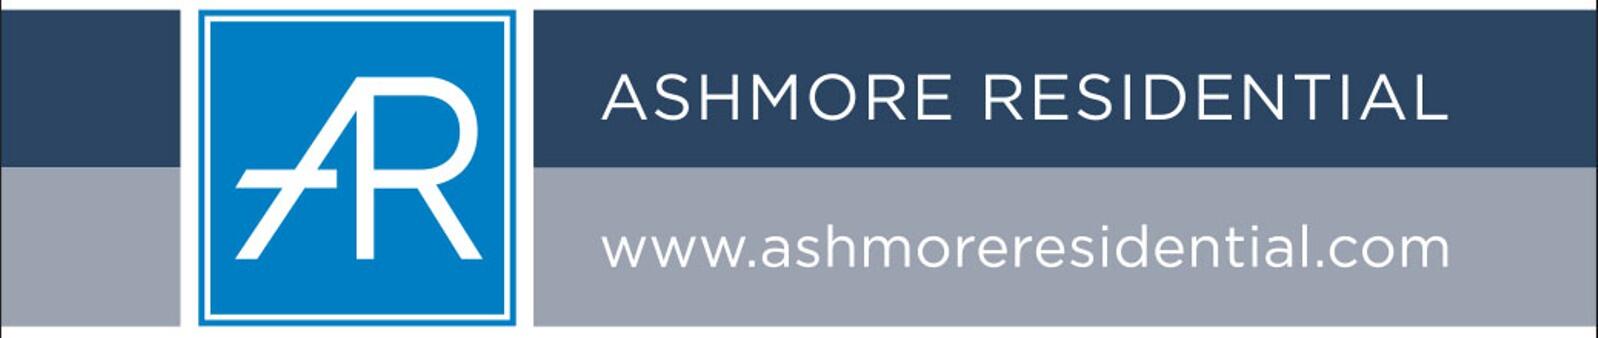 Ashmore Residential - Enfield, Middlesex